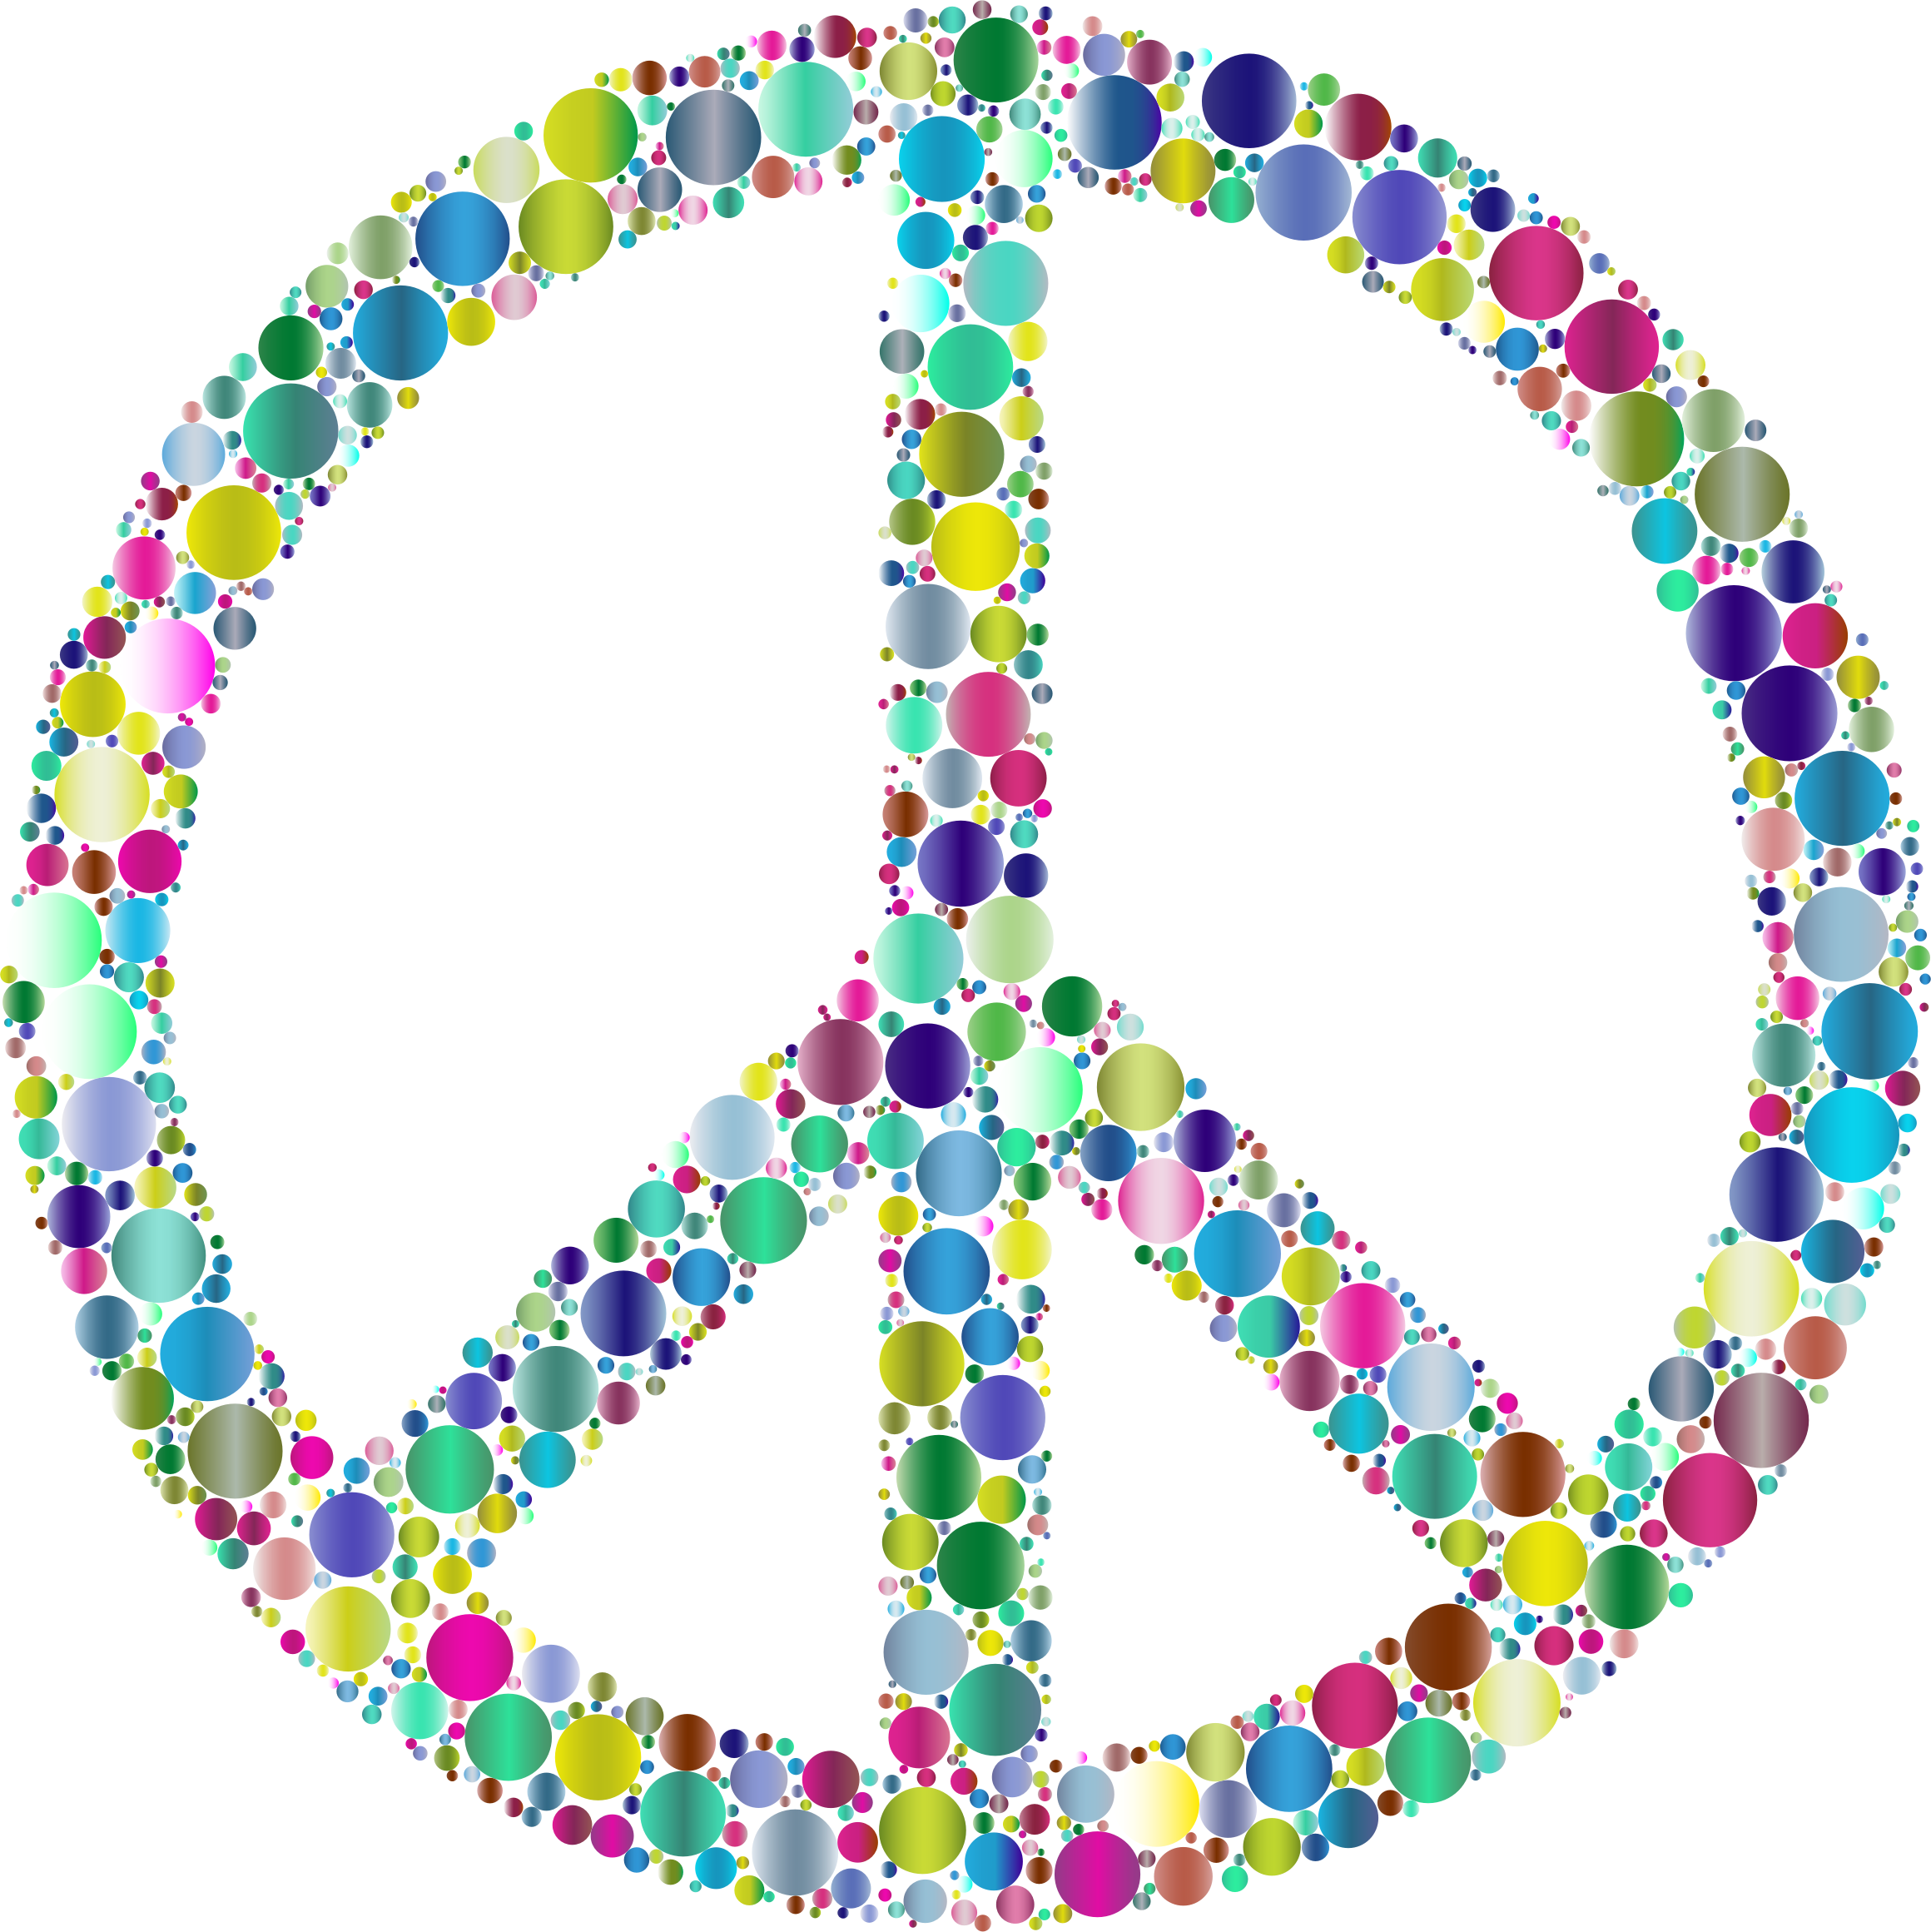 Colorful Circles Peace Sign 7 By Gdj